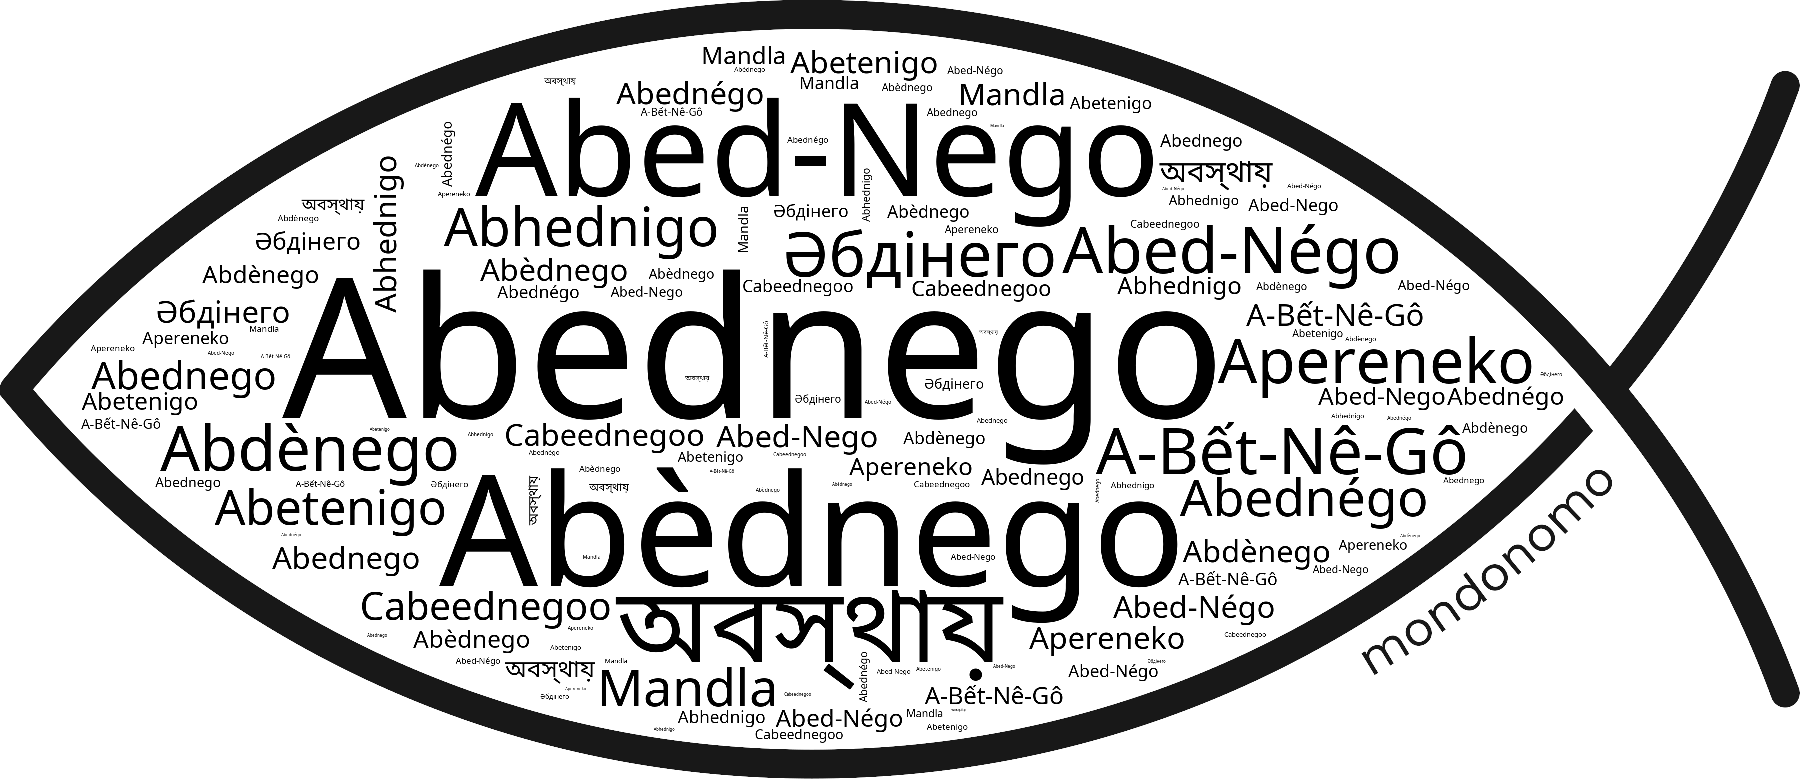 Name Abednego in the world's Bibles